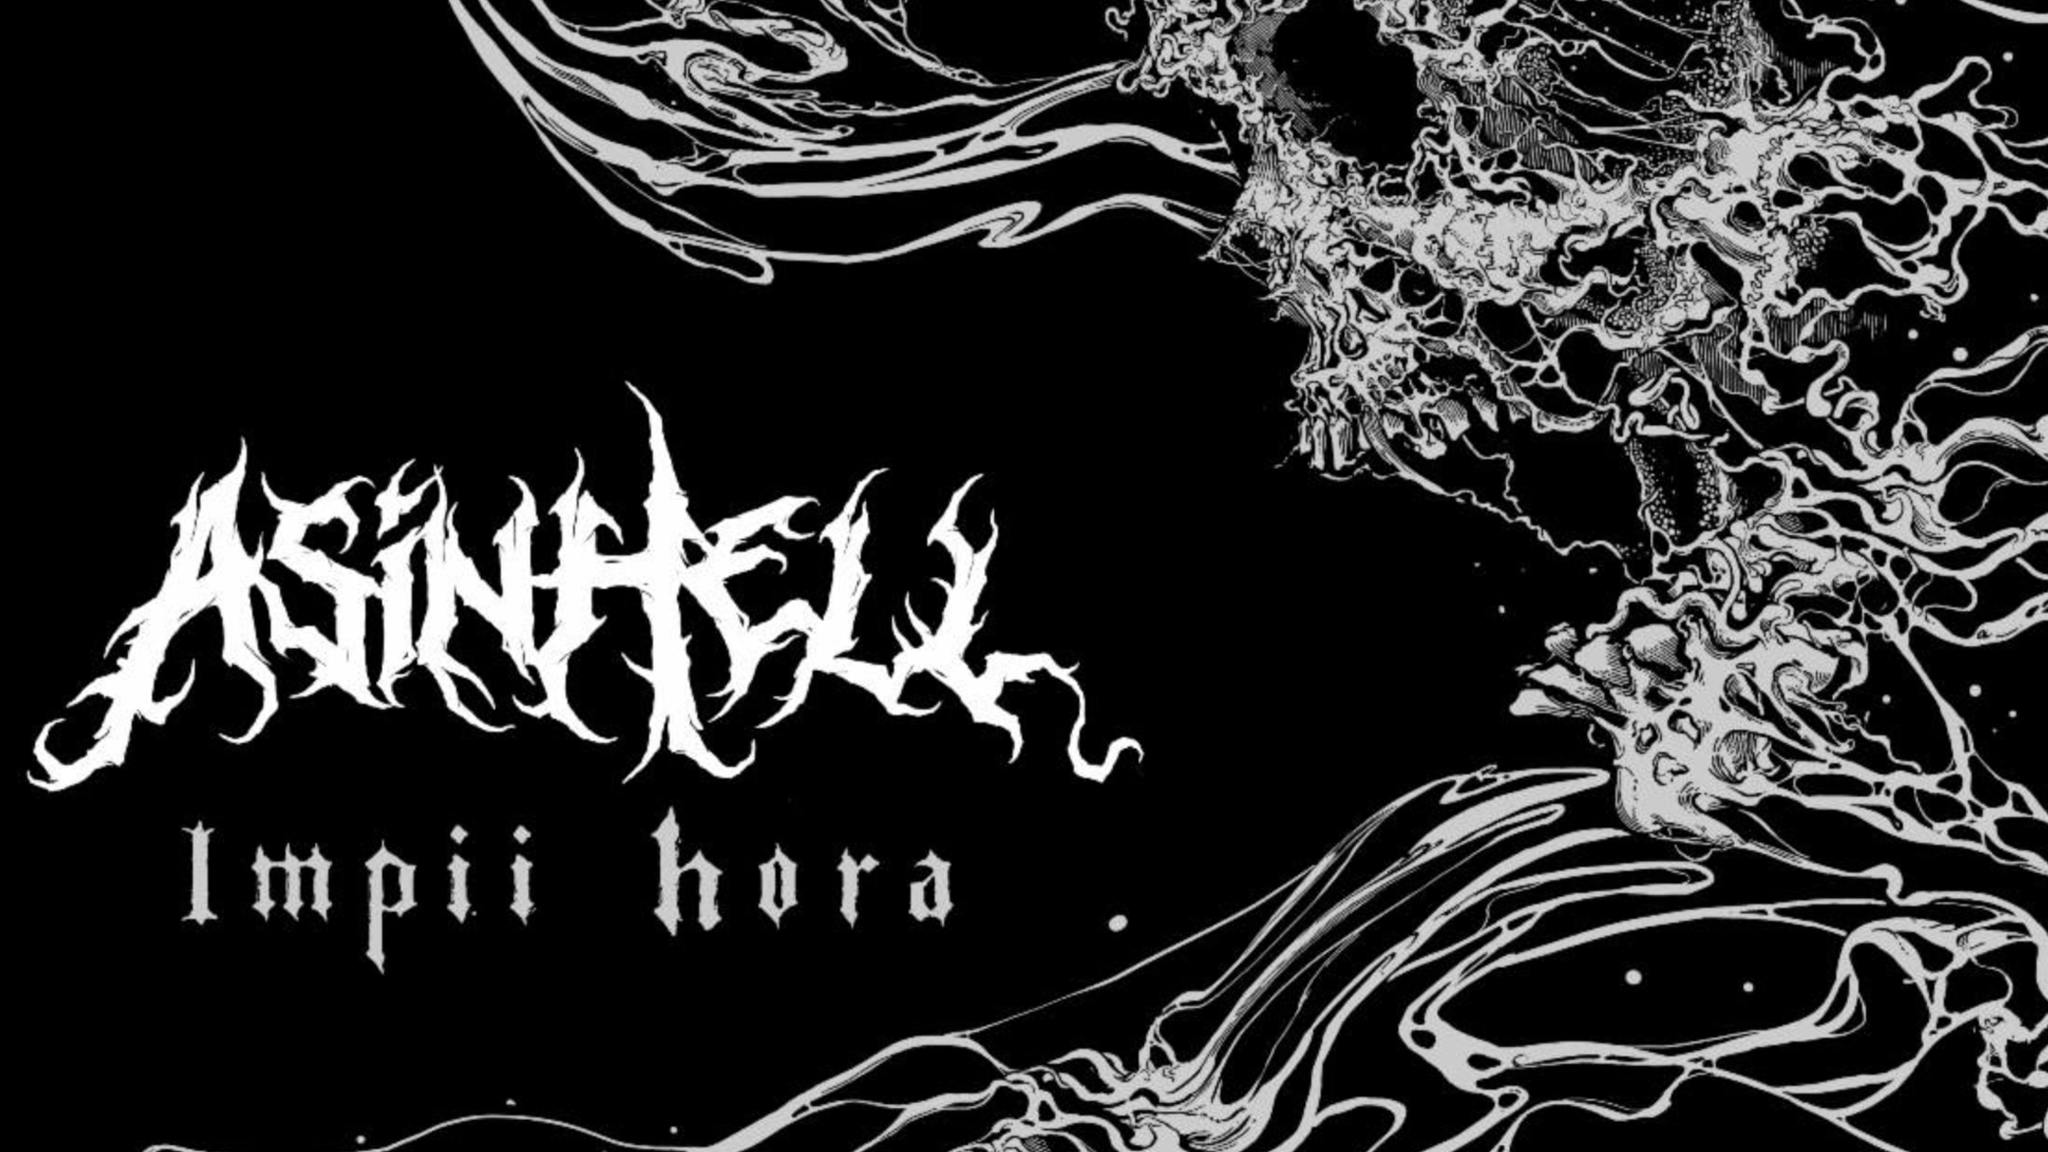 Listen to the debut single from Michael Poulsen’s new death metal project, Asinhell